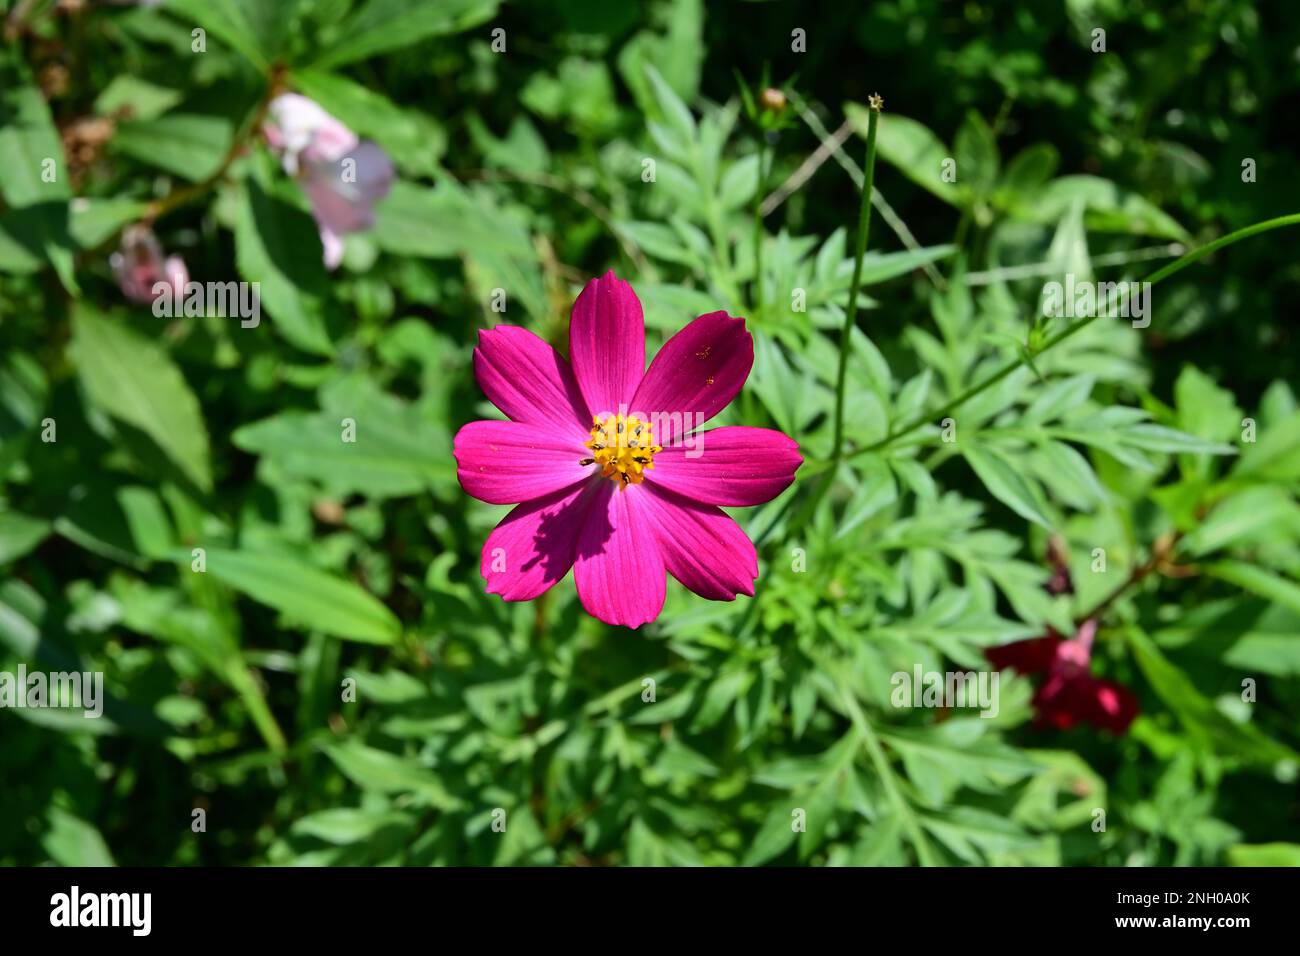 A welly bloomed purple Cosmos flower in full focus in the garden. Stock Photo